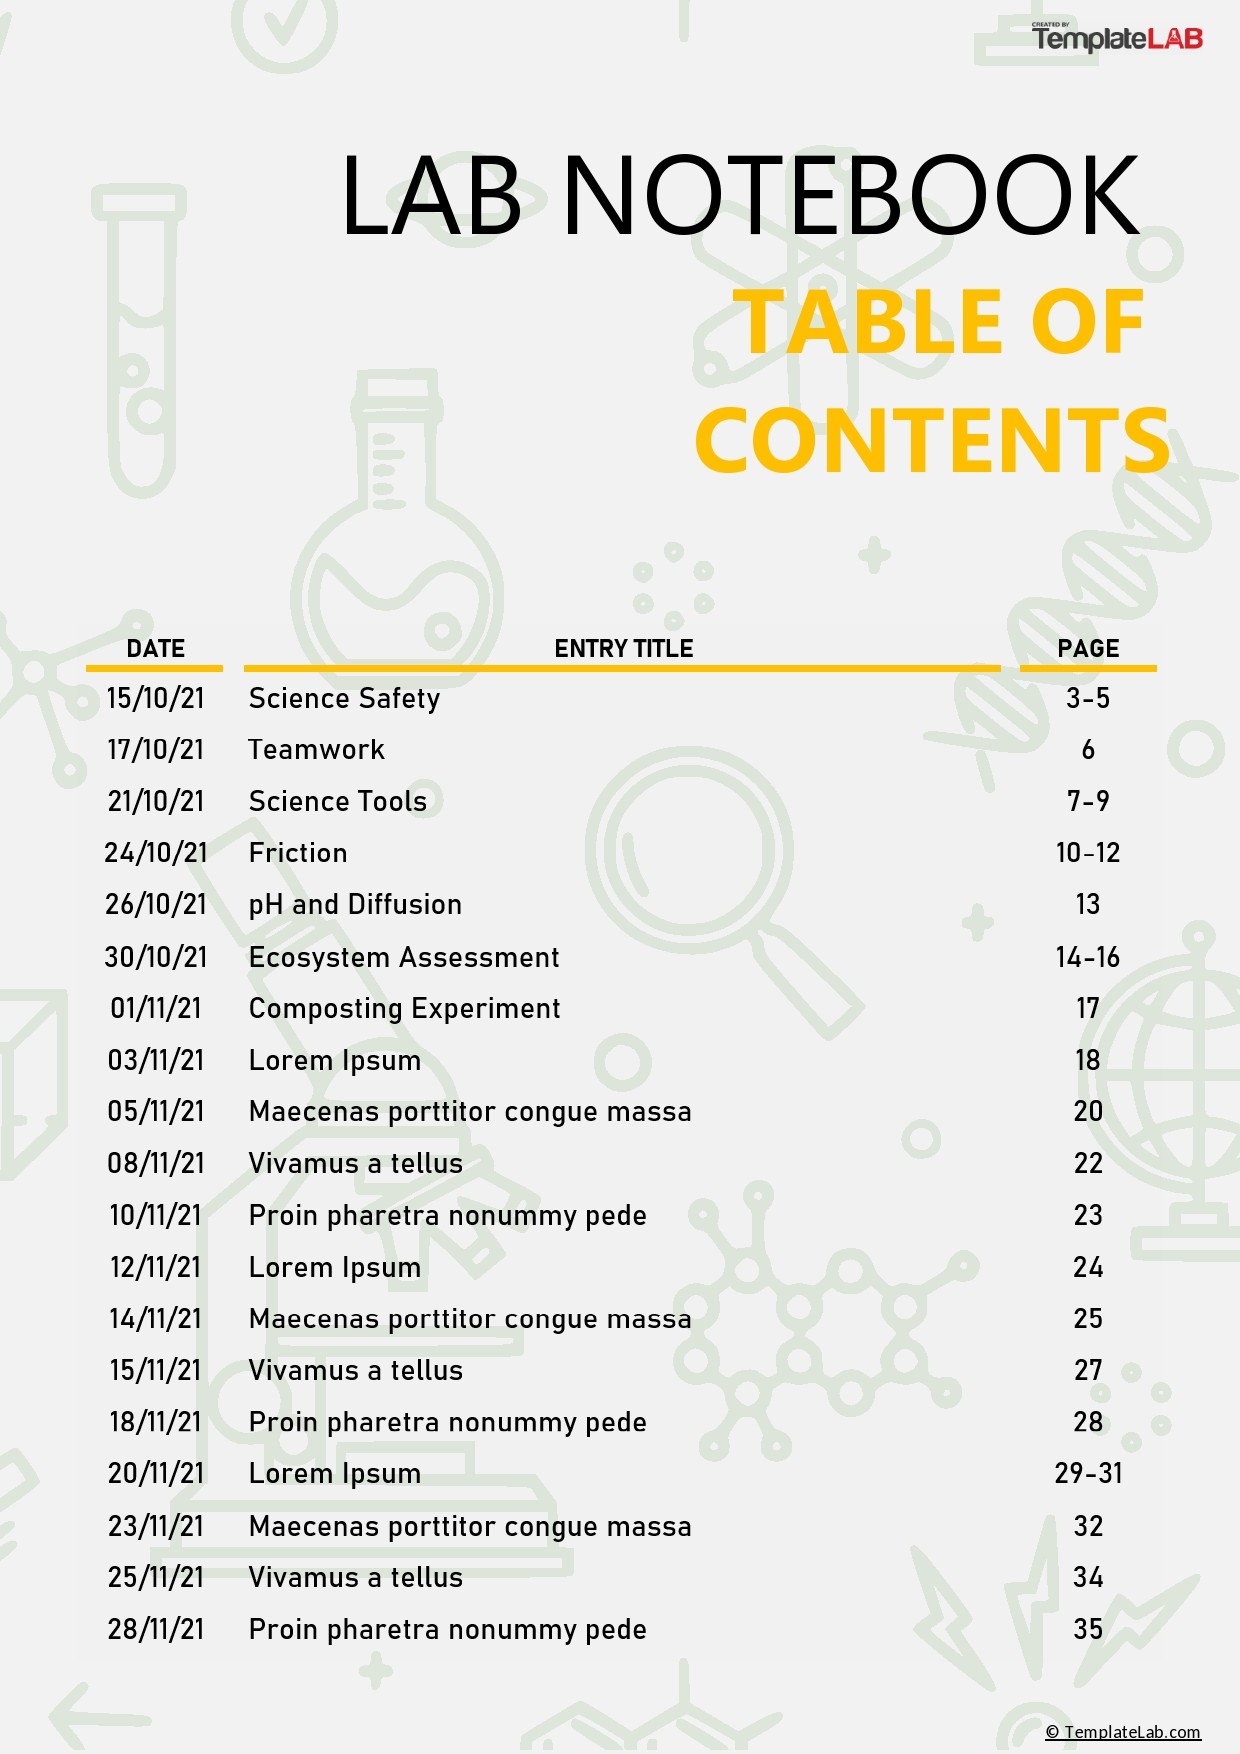 Free Lab Notebook Table of Contents - TemplateLab.com